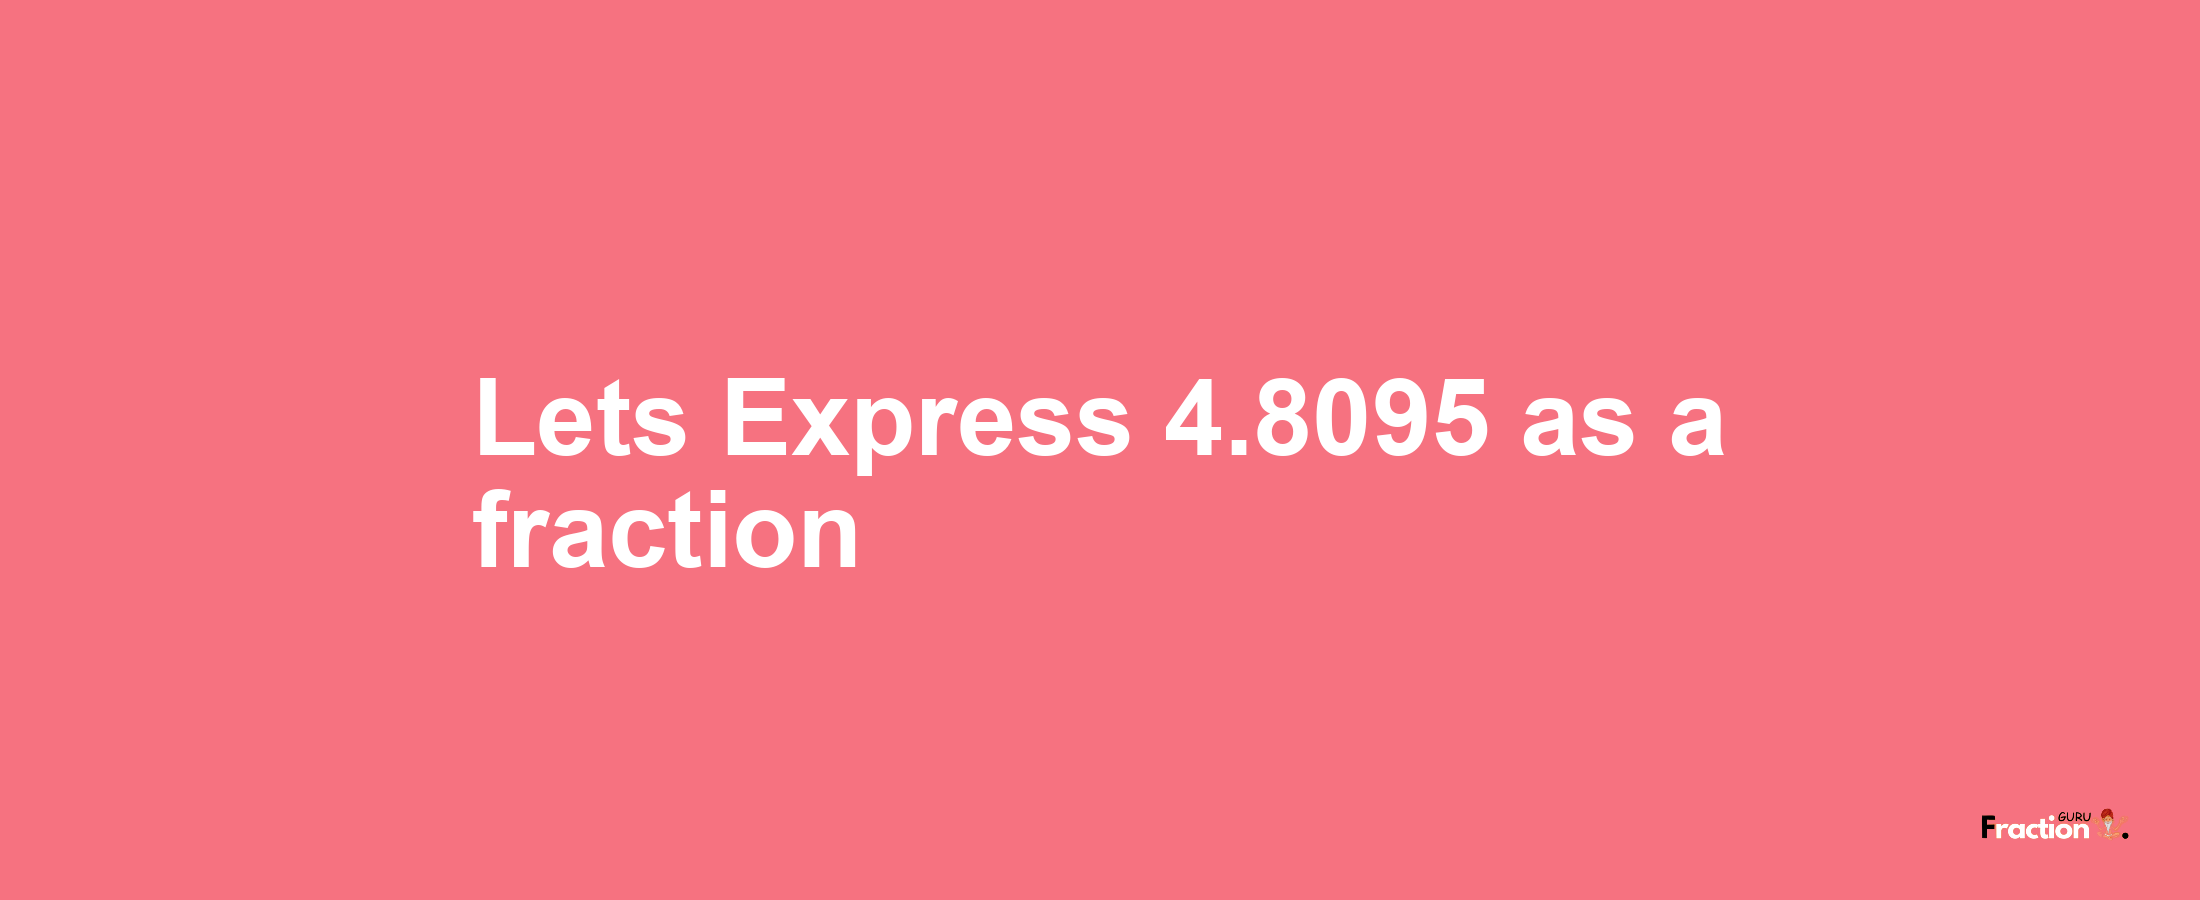 Lets Express 4.8095 as afraction